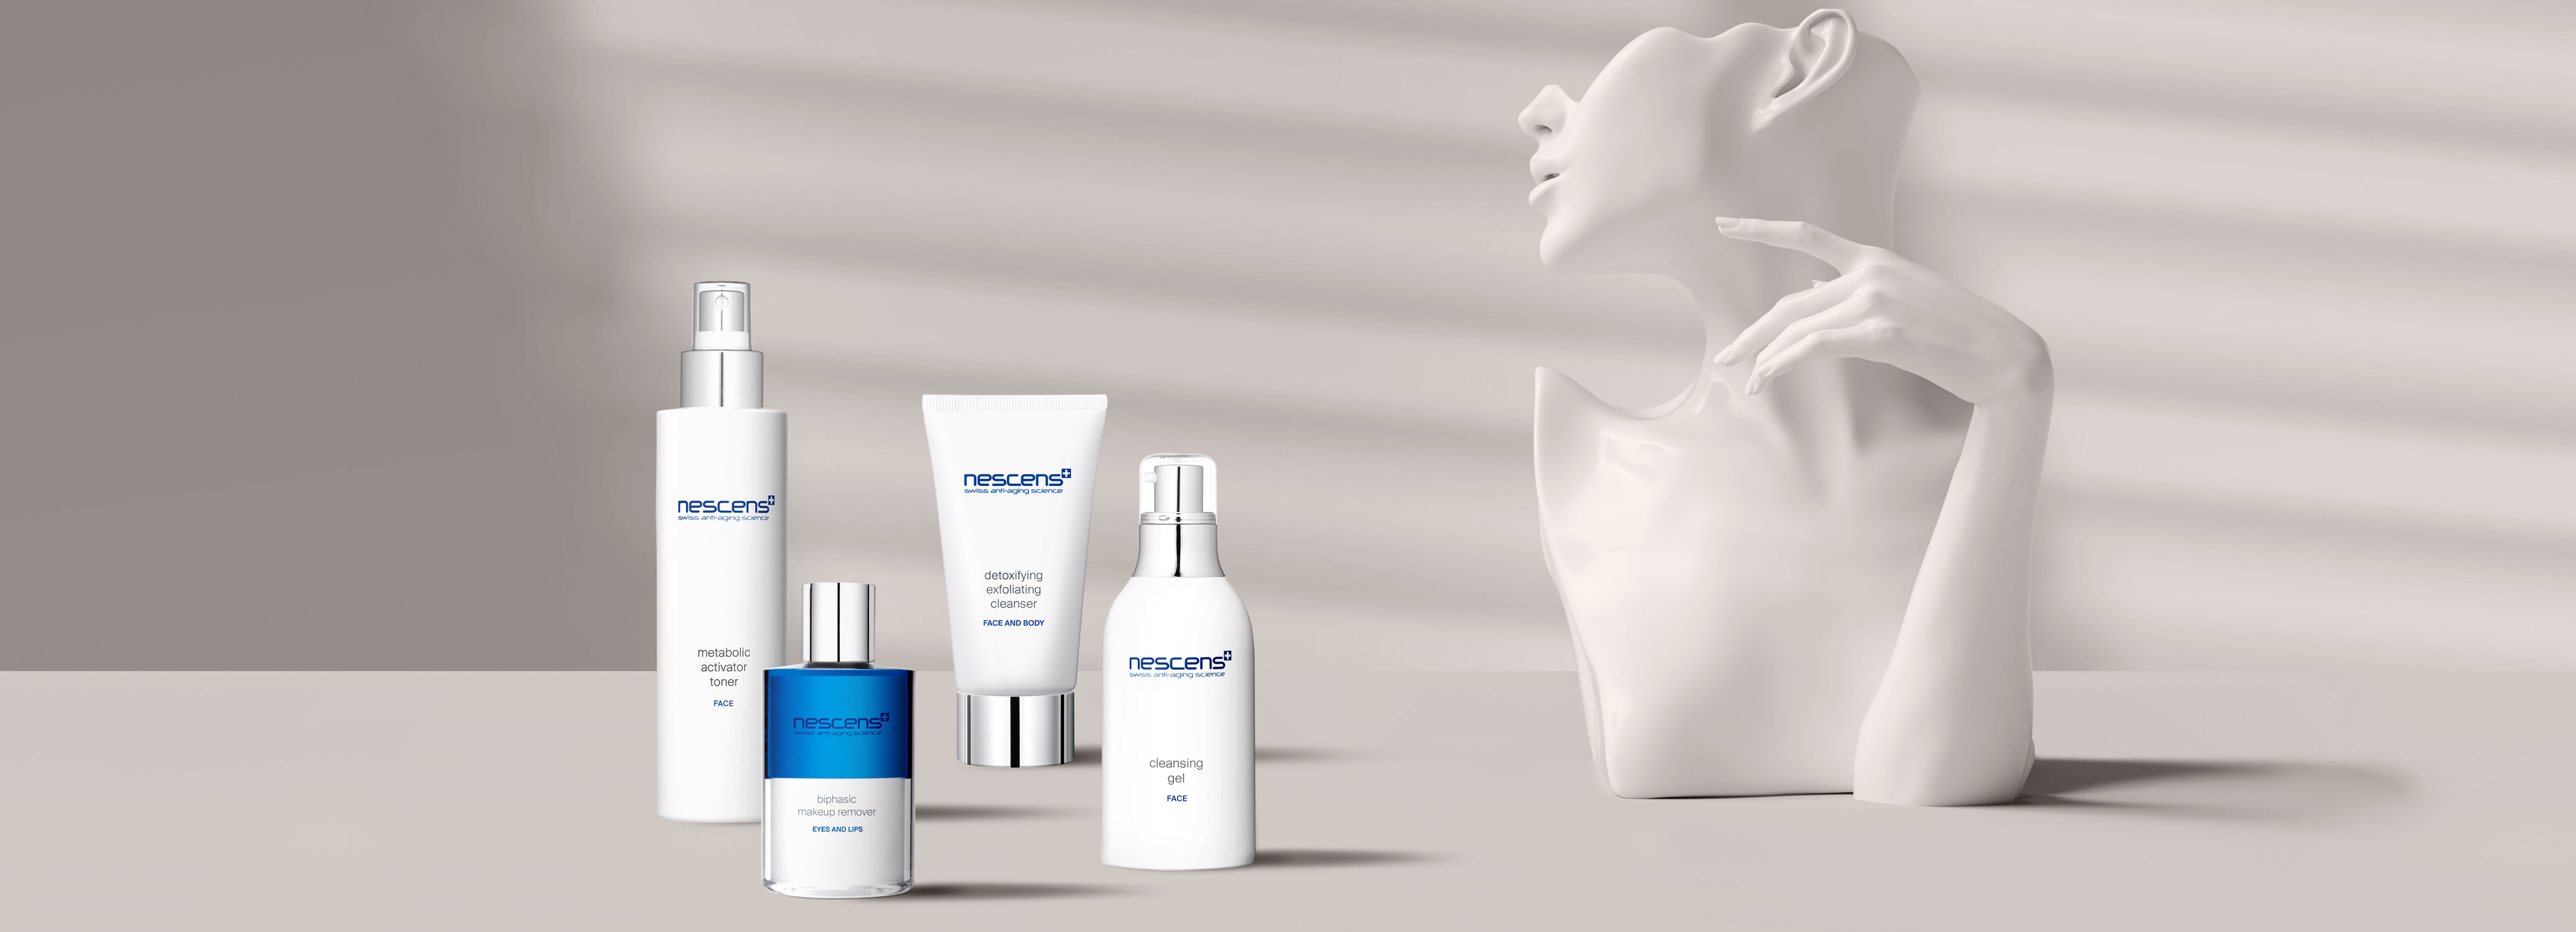 aout suisse anti aging)